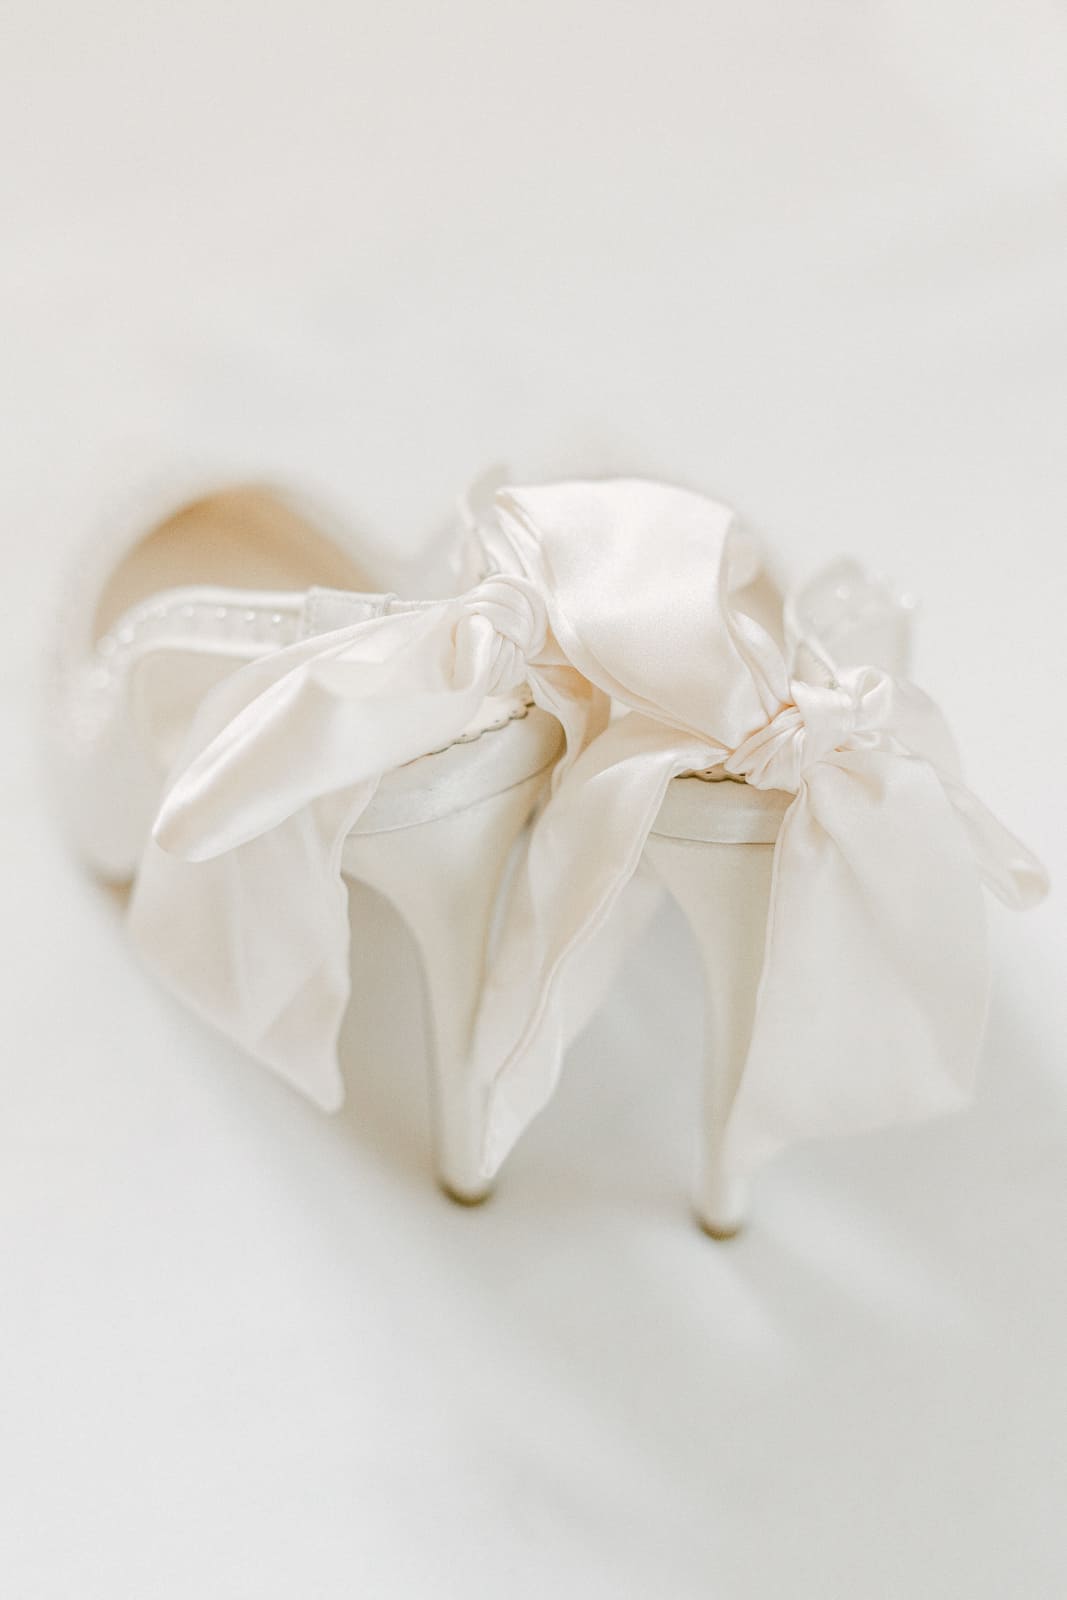 Bella Belle shoes wedding white shoes with pearls and bows